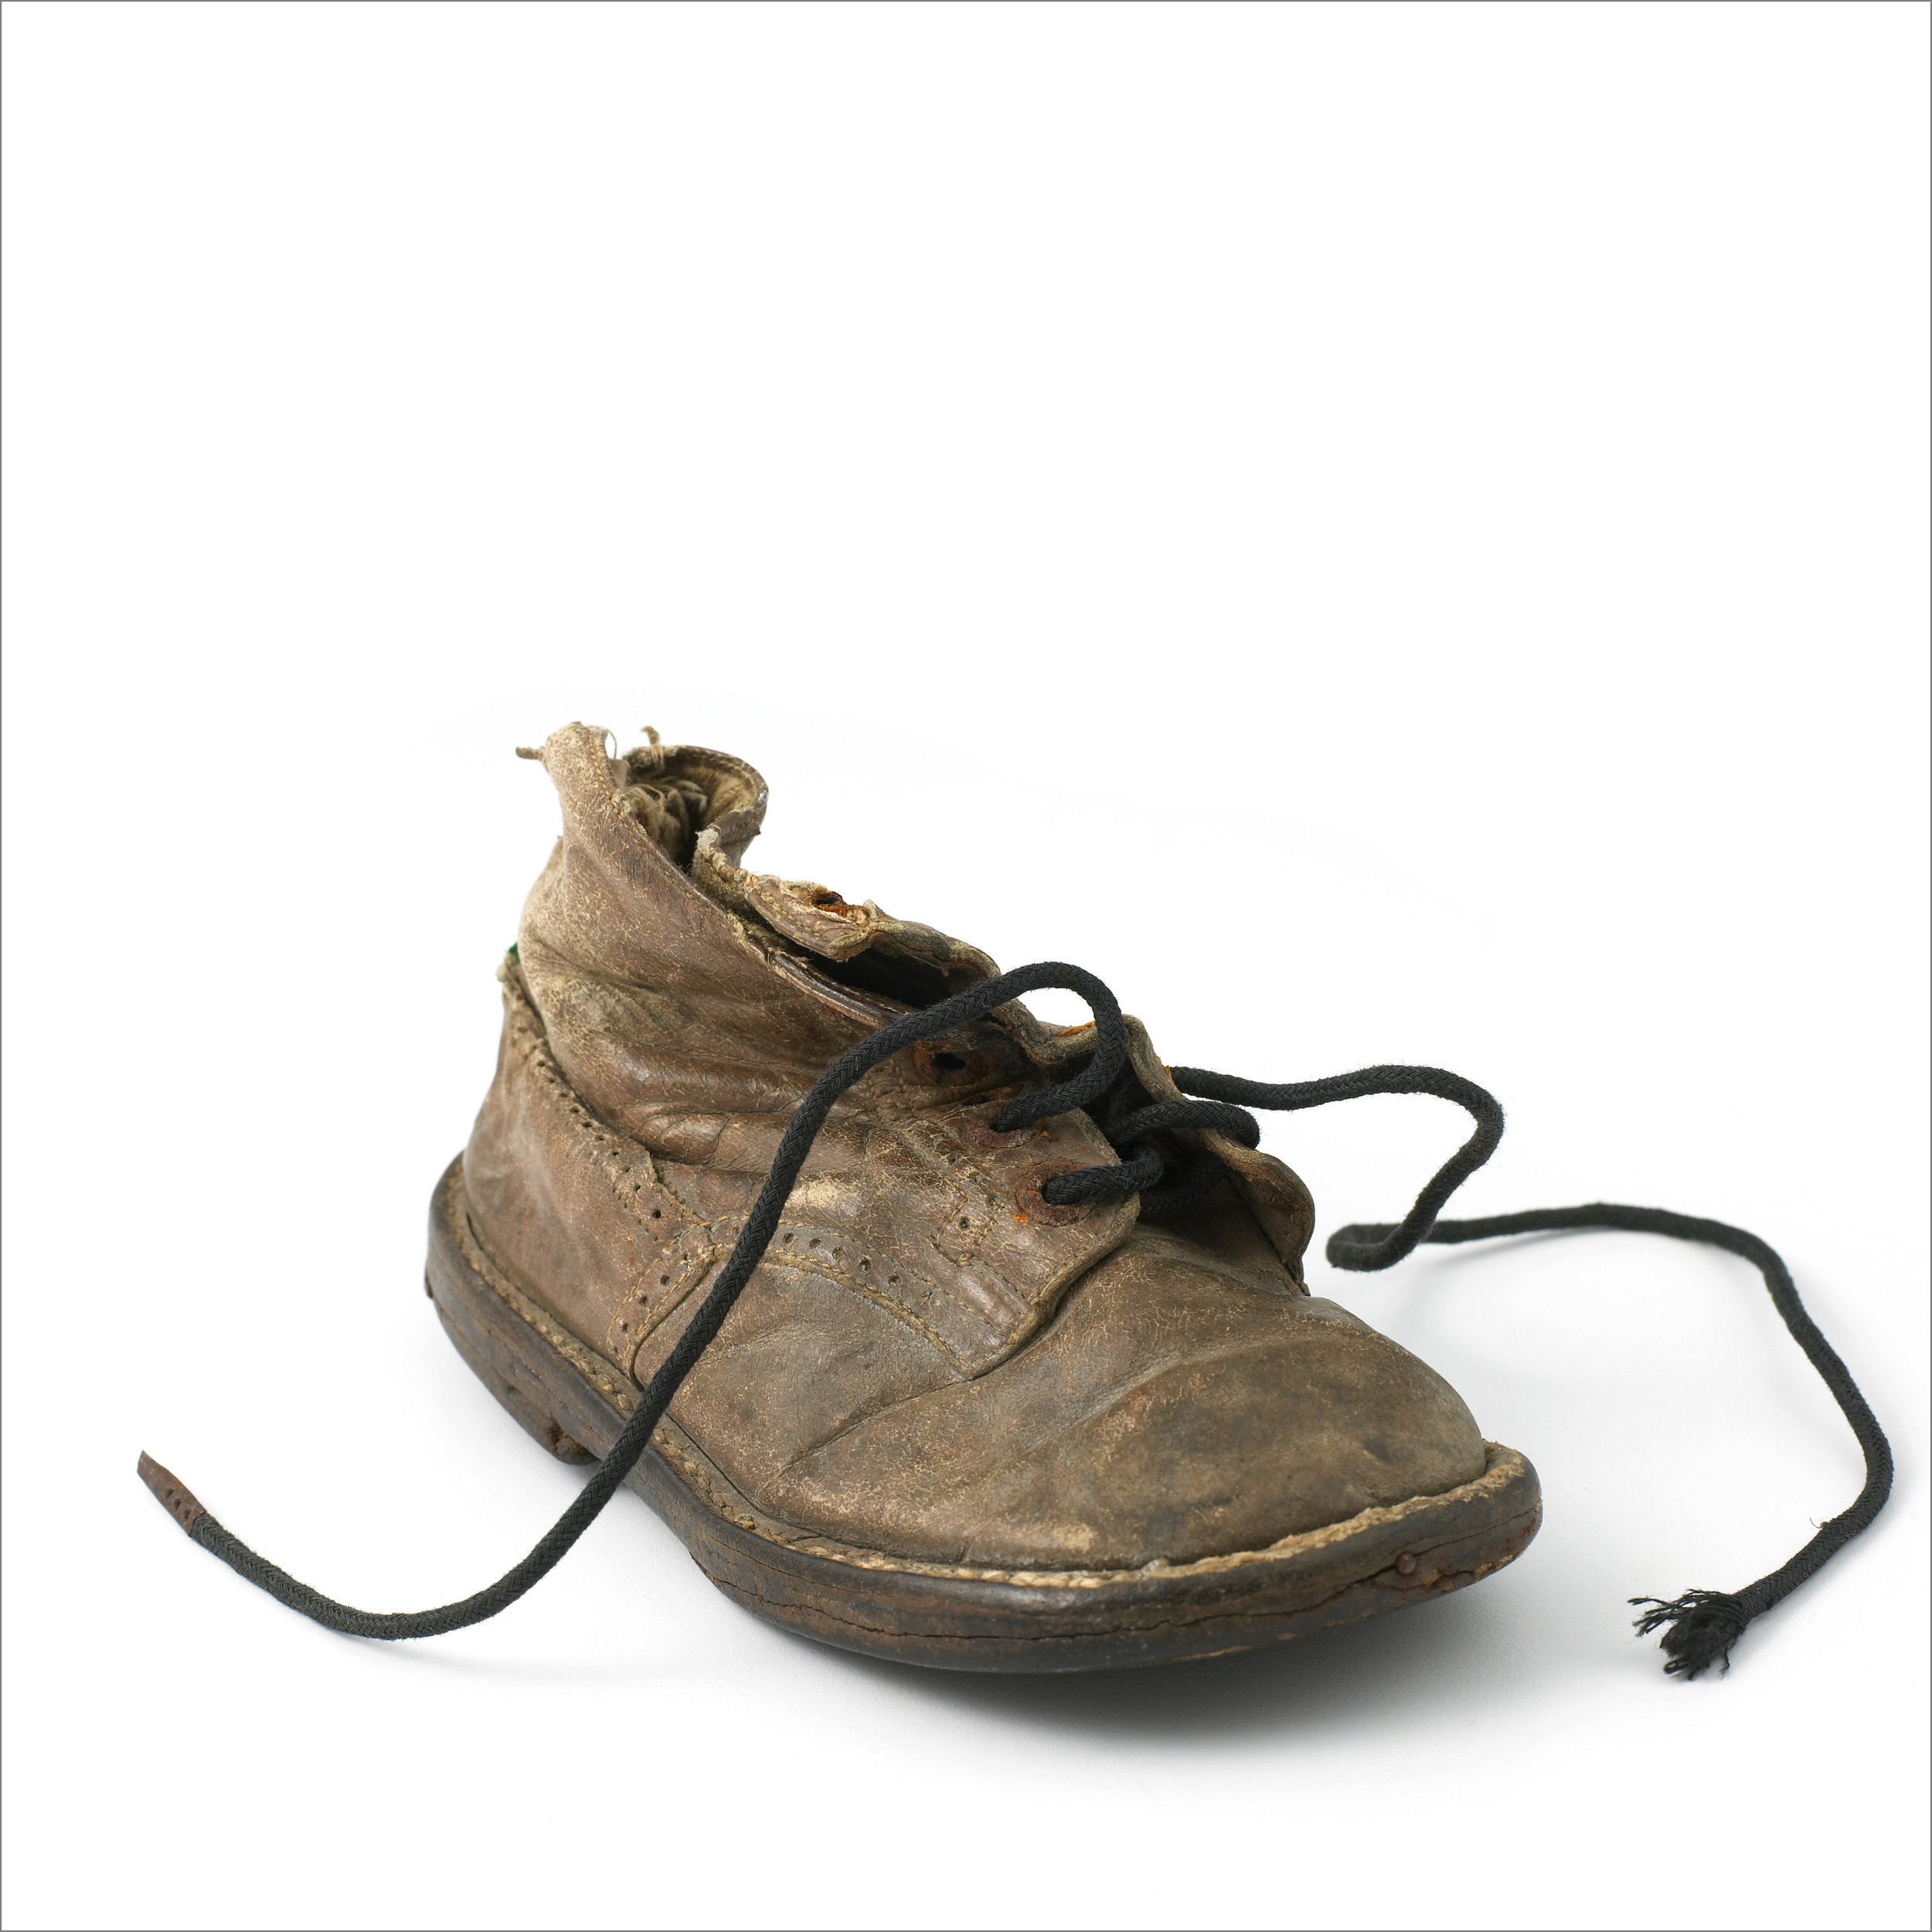 Child’s Shoe found in a Nazi concentration camp